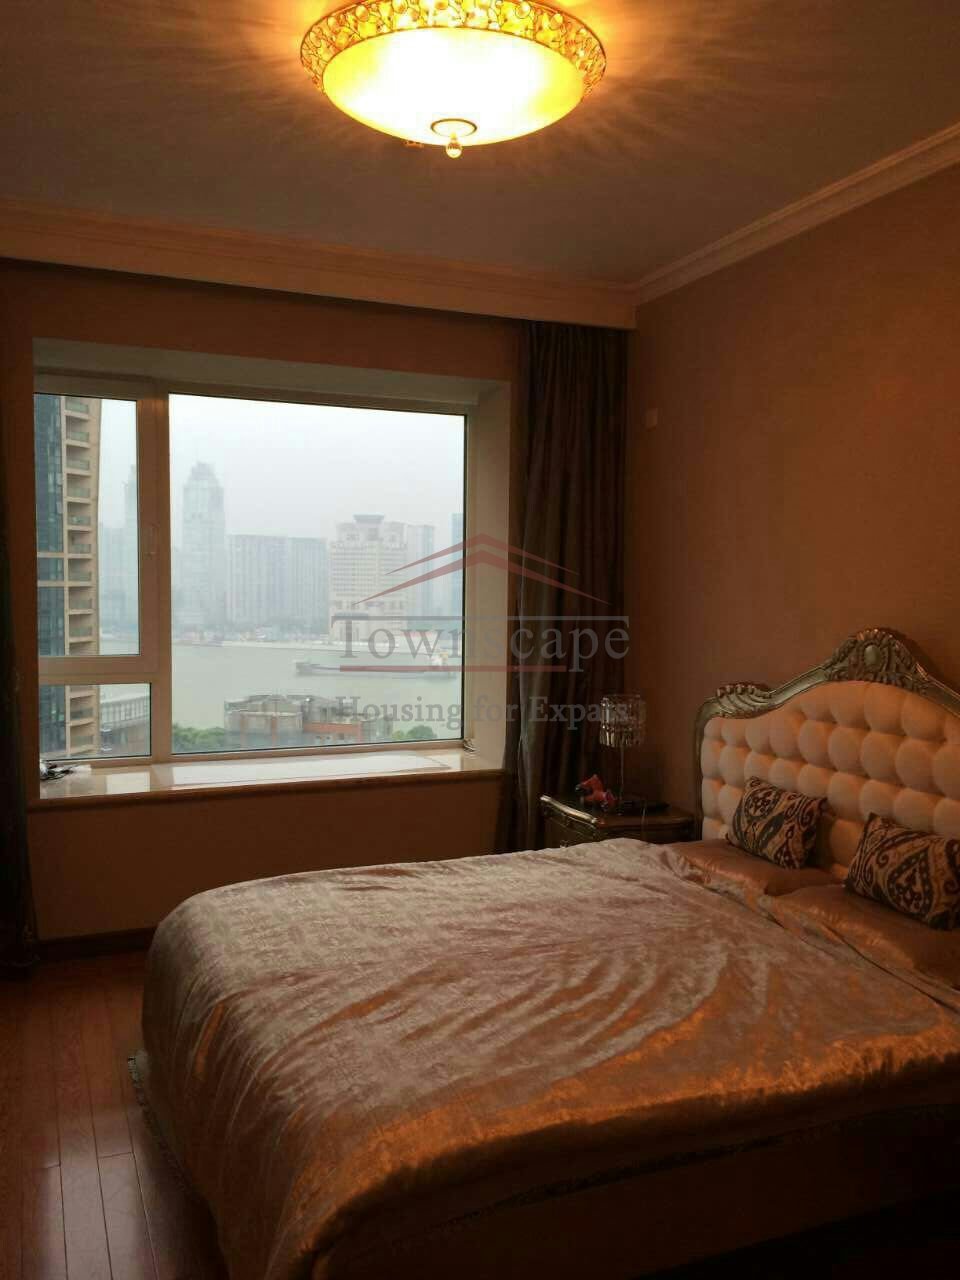 Rent apartment in pudong shanghai Large 3 BR Apartment in exclusive Skyline mansion Pudong